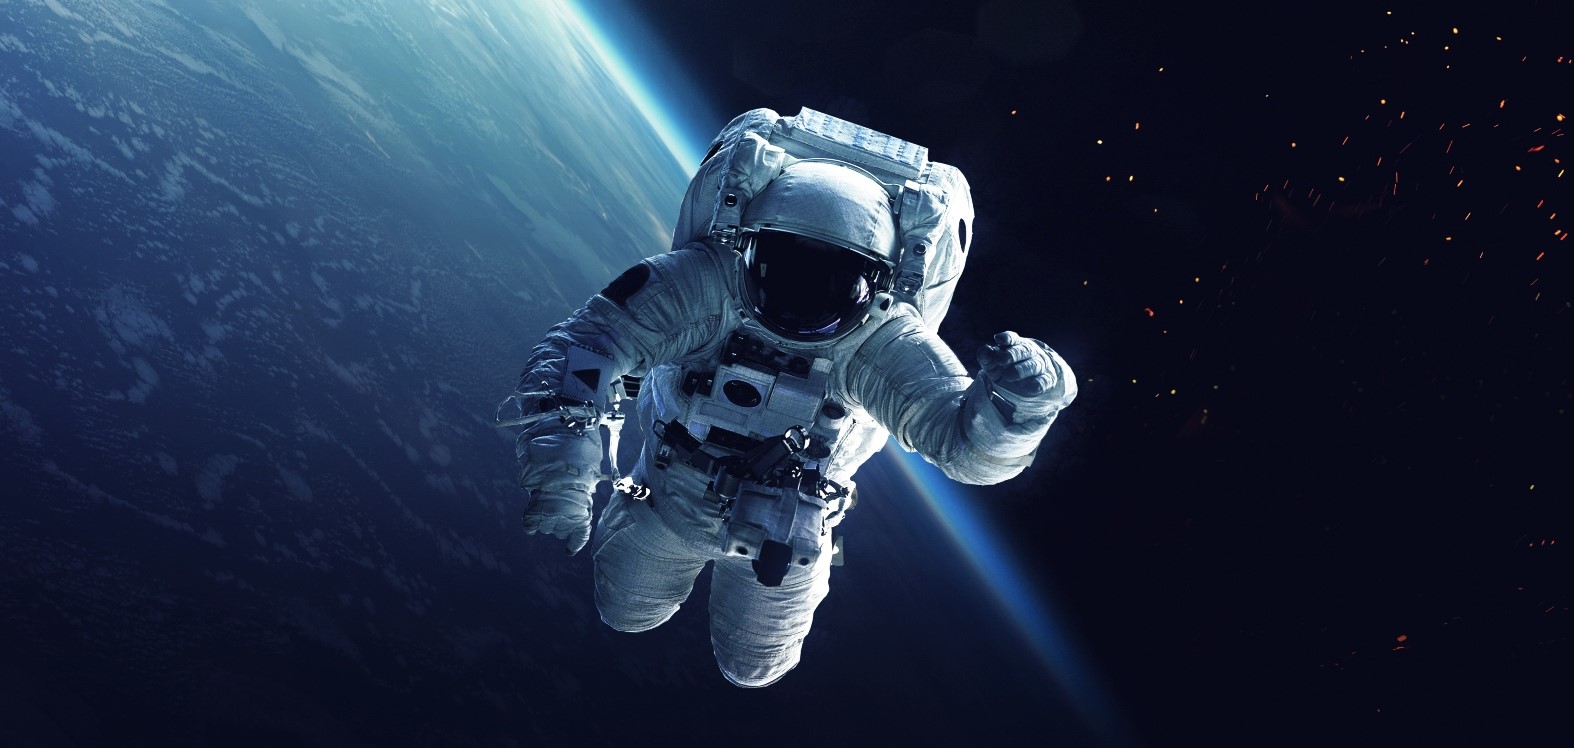 Astronaut floating above earth on spacewalk